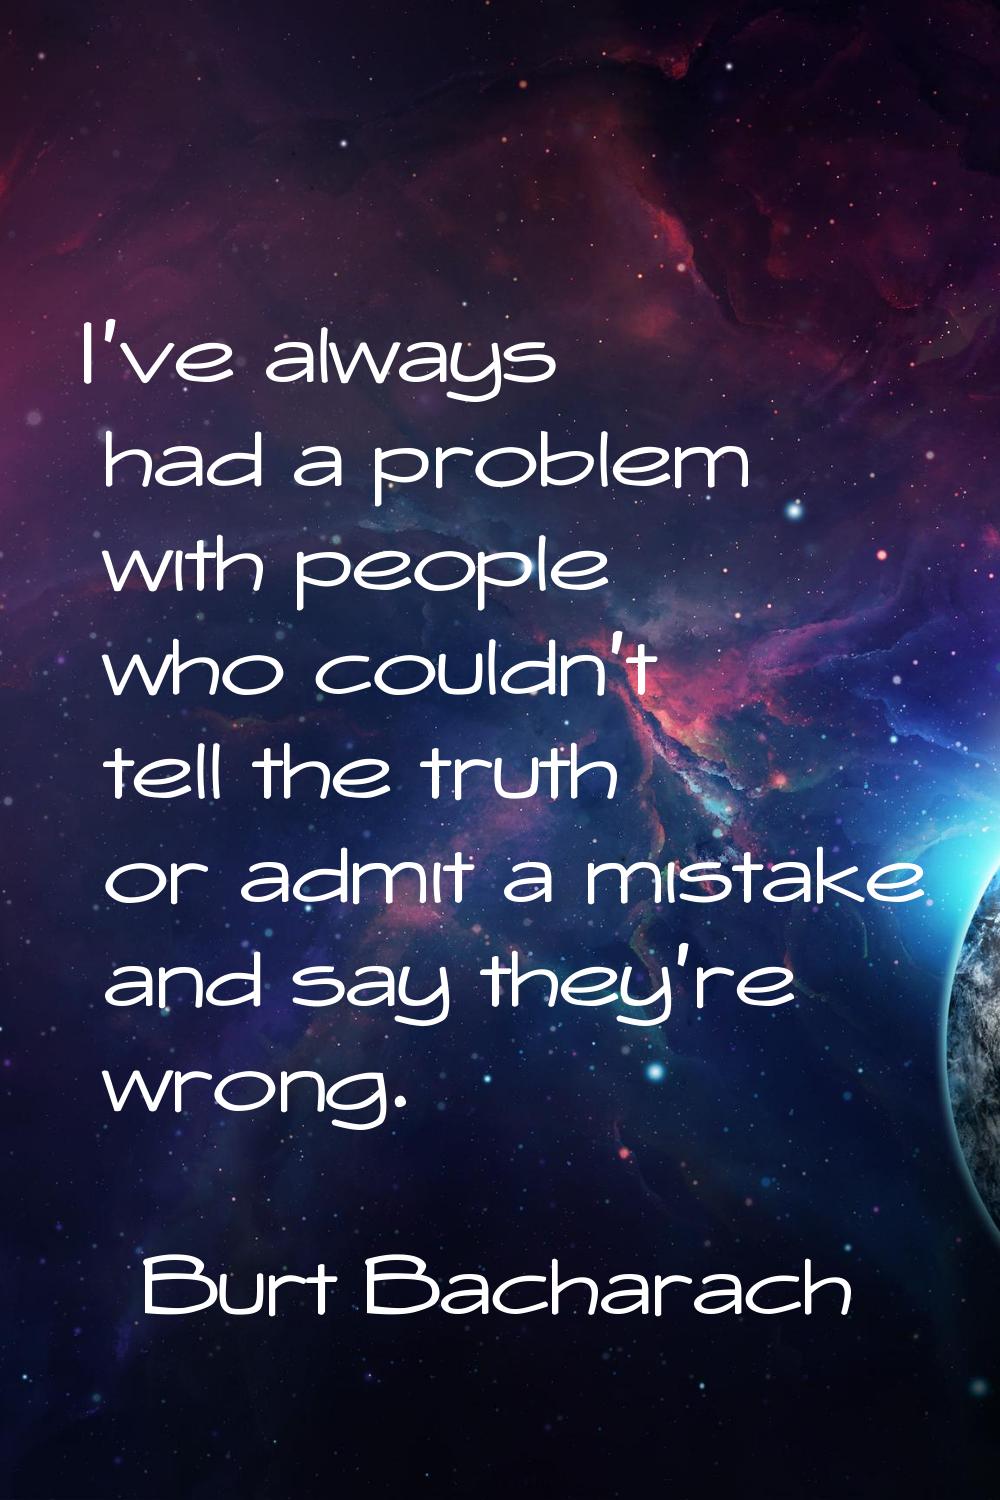 I've always had a problem with people who couldn't tell the truth or admit a mistake and say they'r